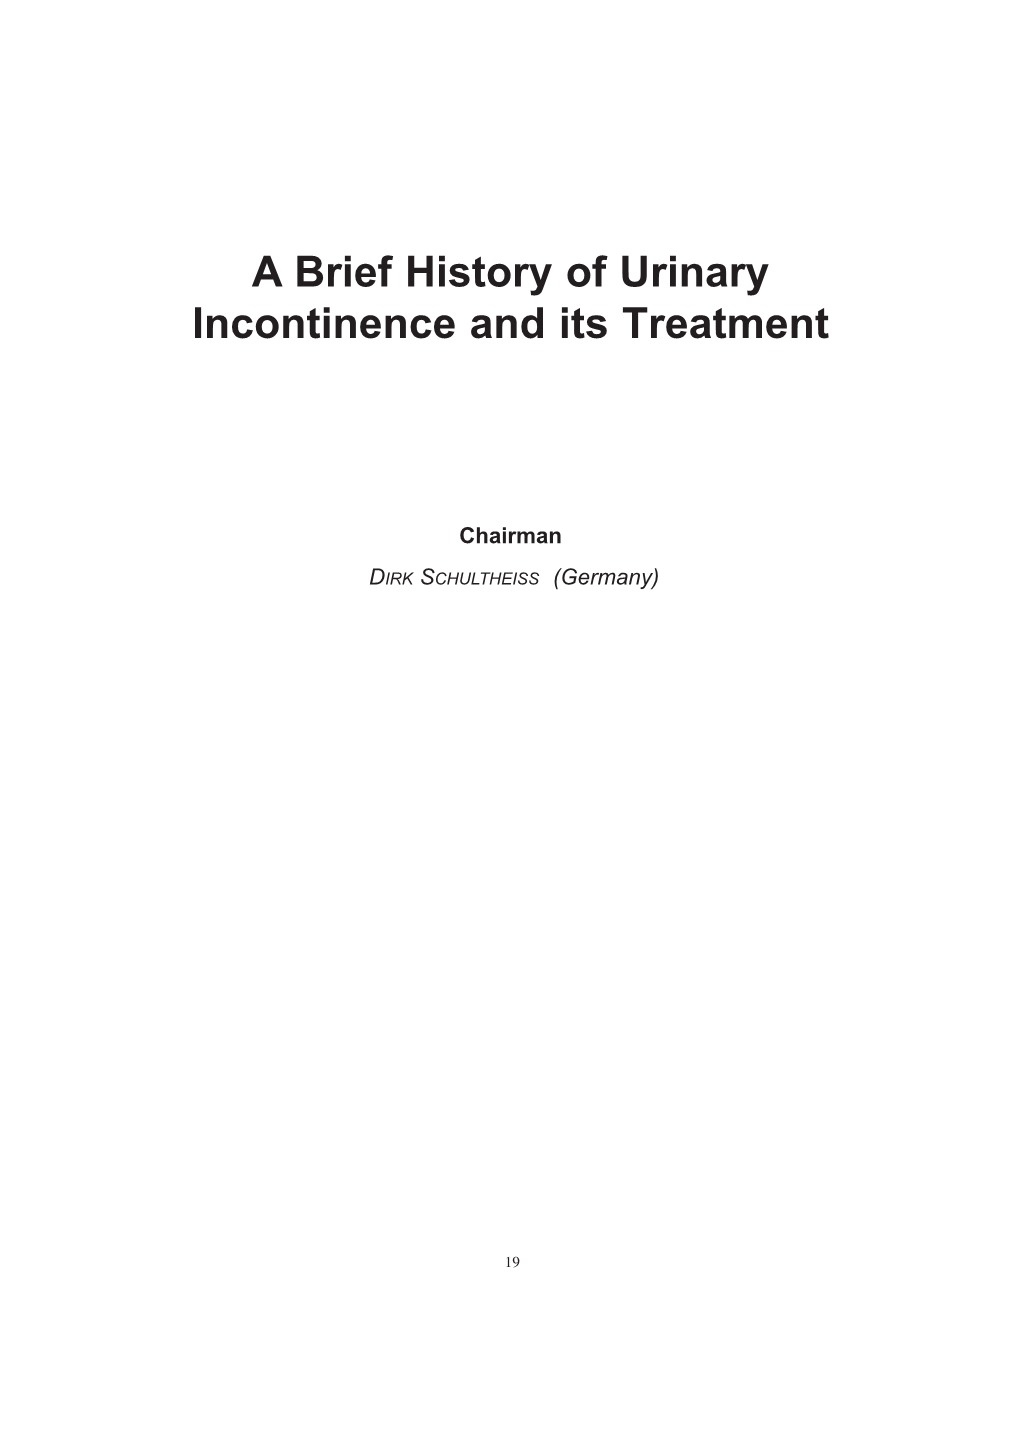 A Brief History of Urinary Incontinence and Its Treatment